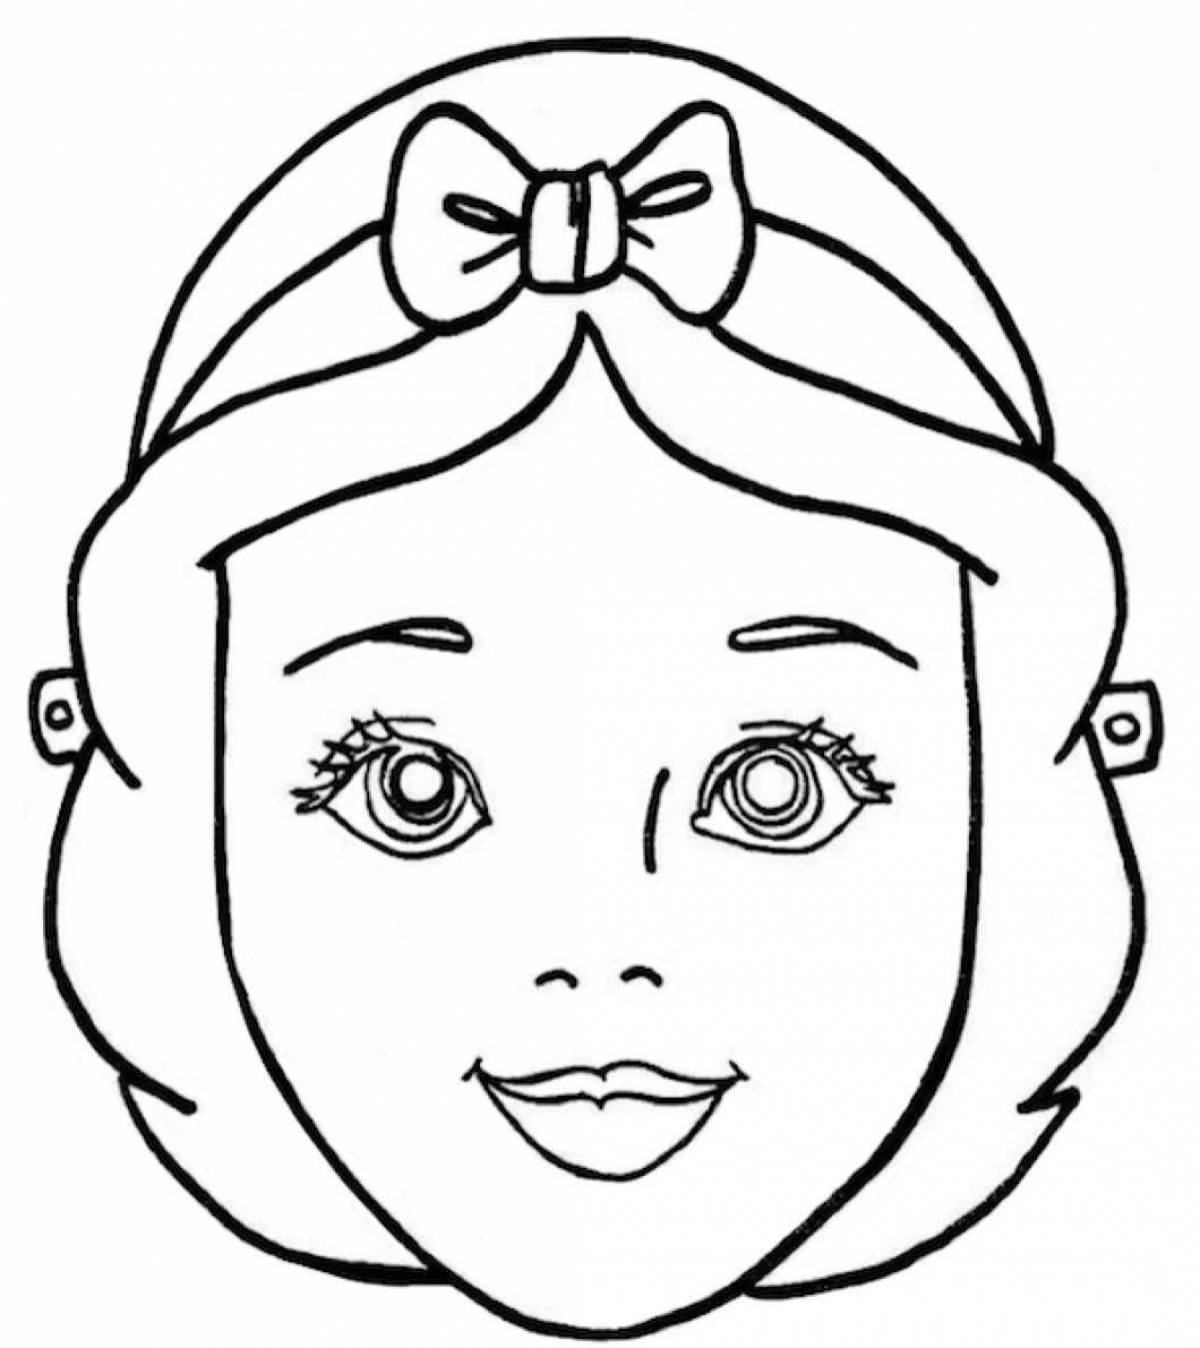 Children's funny woman face coloring book